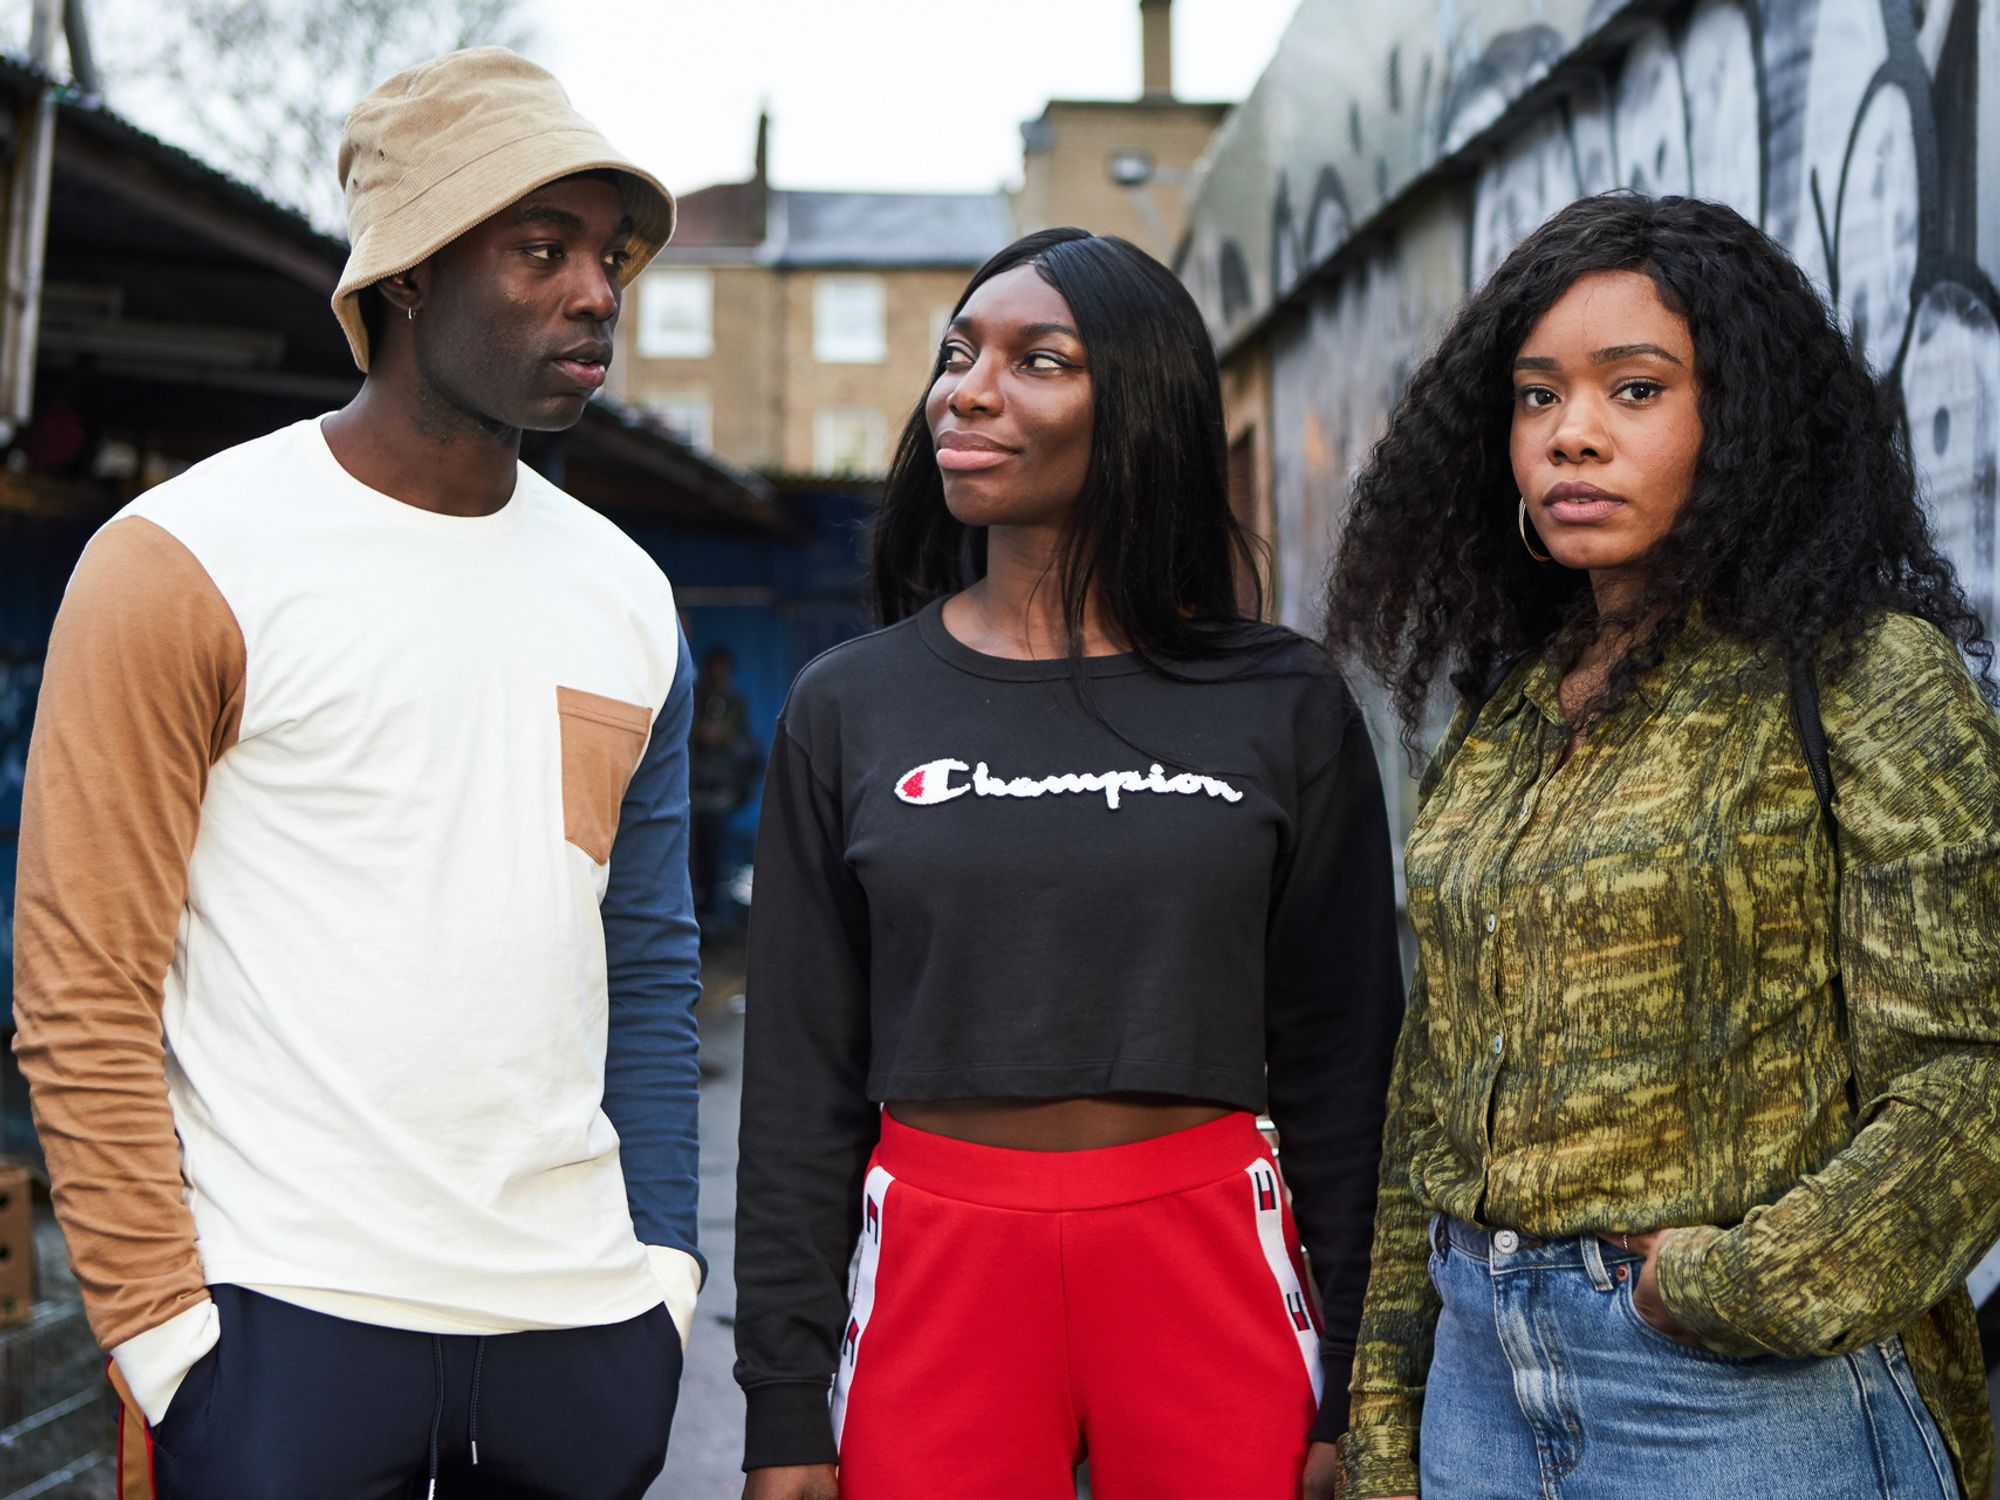 Michaela Coel and the cast of HBO's 'I May Destroy You' standing in a London alley. Wearing streetwear and bucket hat.